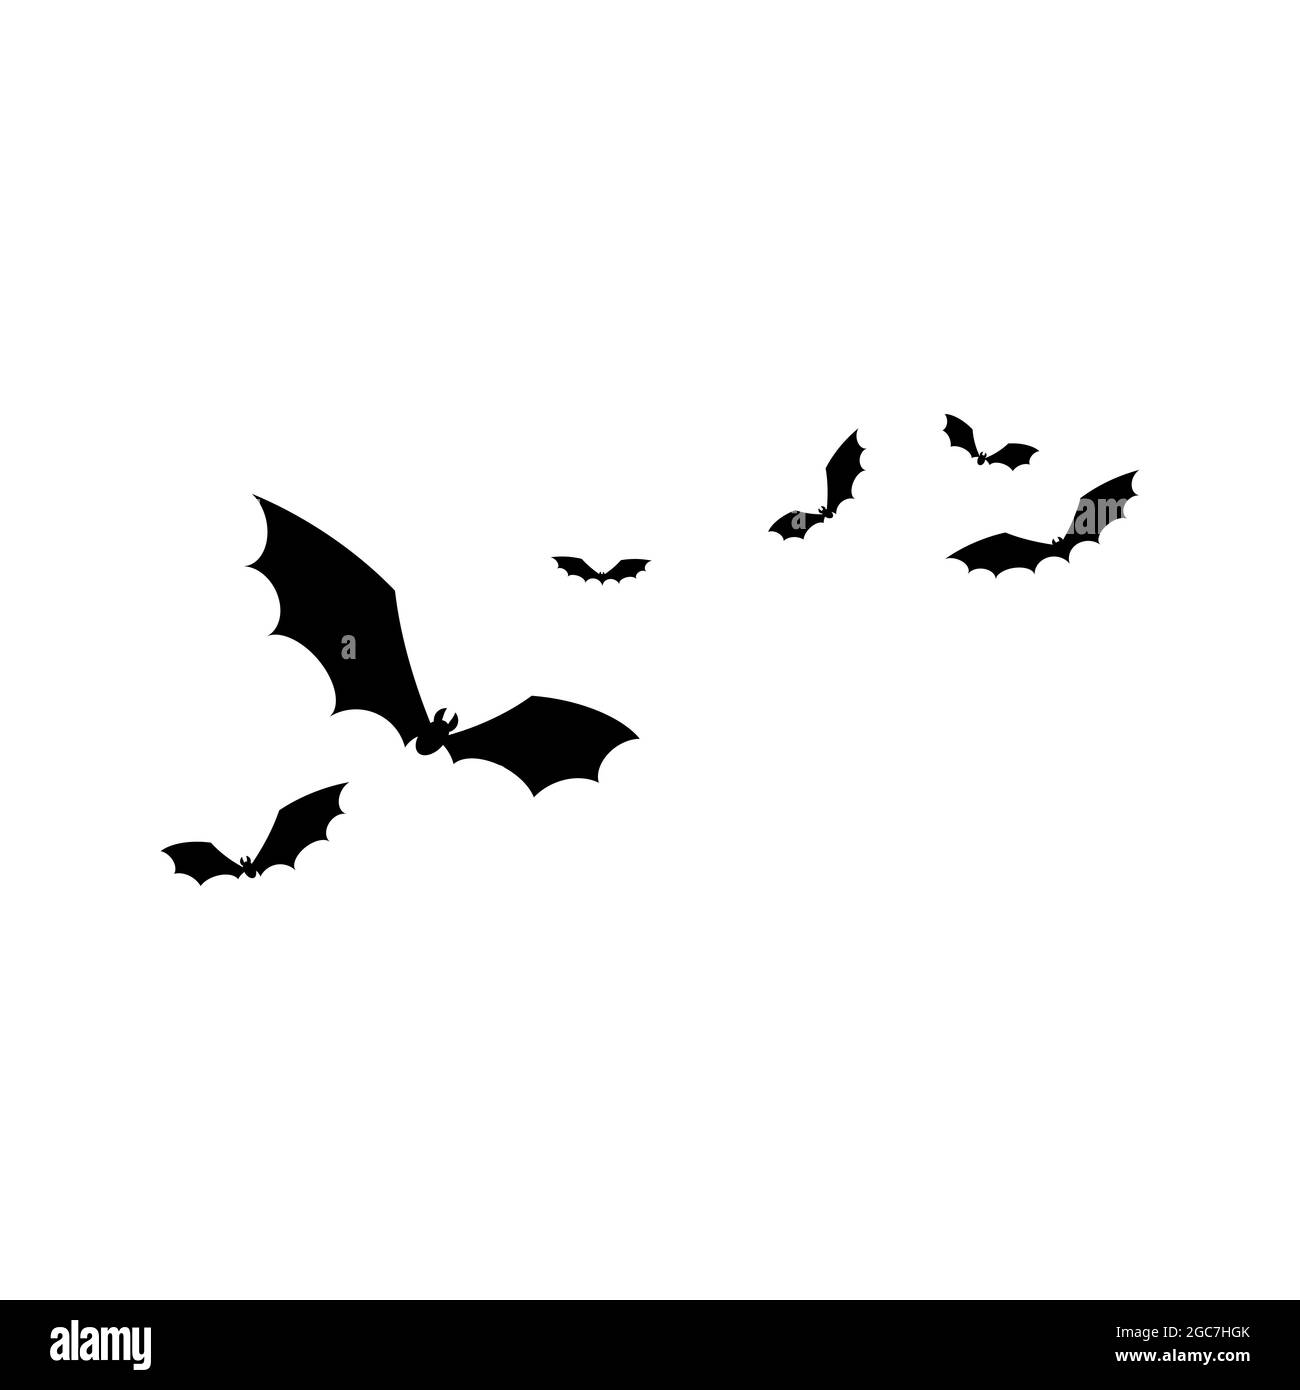 Halloween Wallpaper With Black Flying Bats On White Background